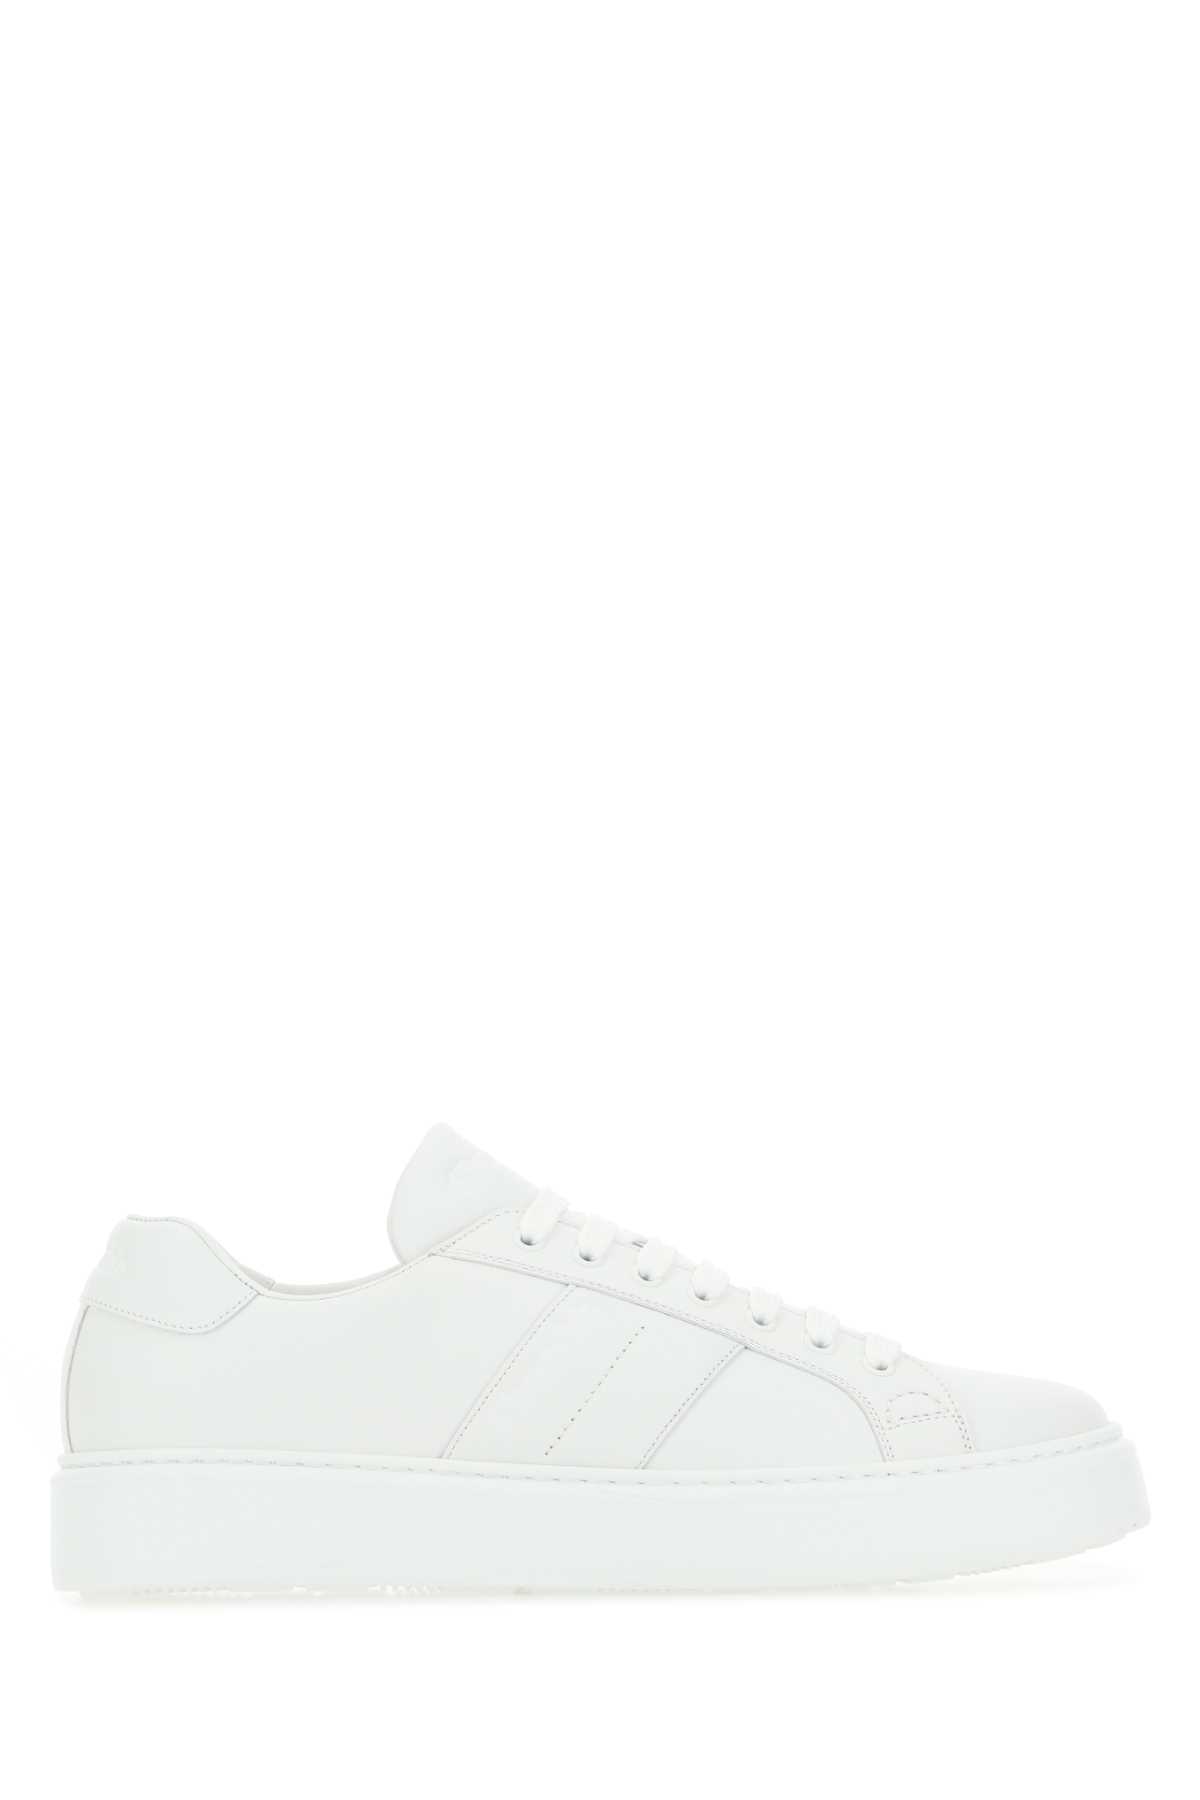 White Leather Mach 3 Sneakers